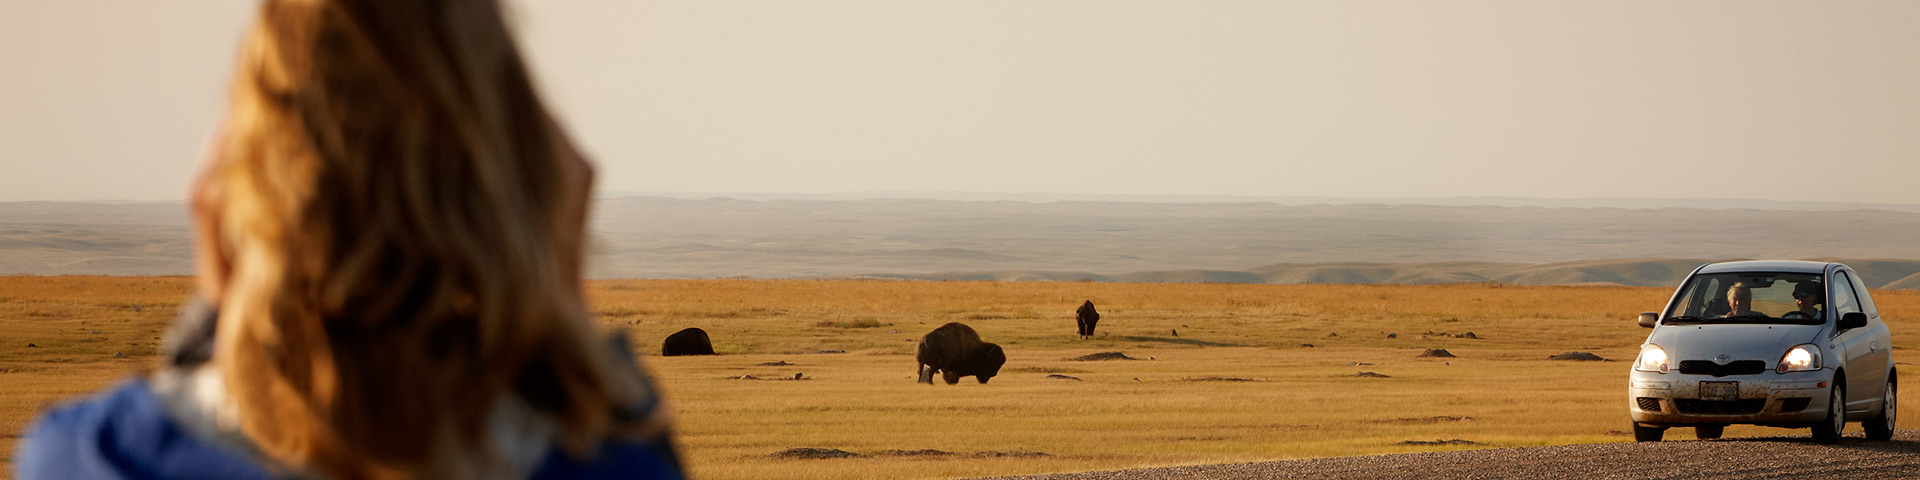 Visitors watch the buffalo on the plains.